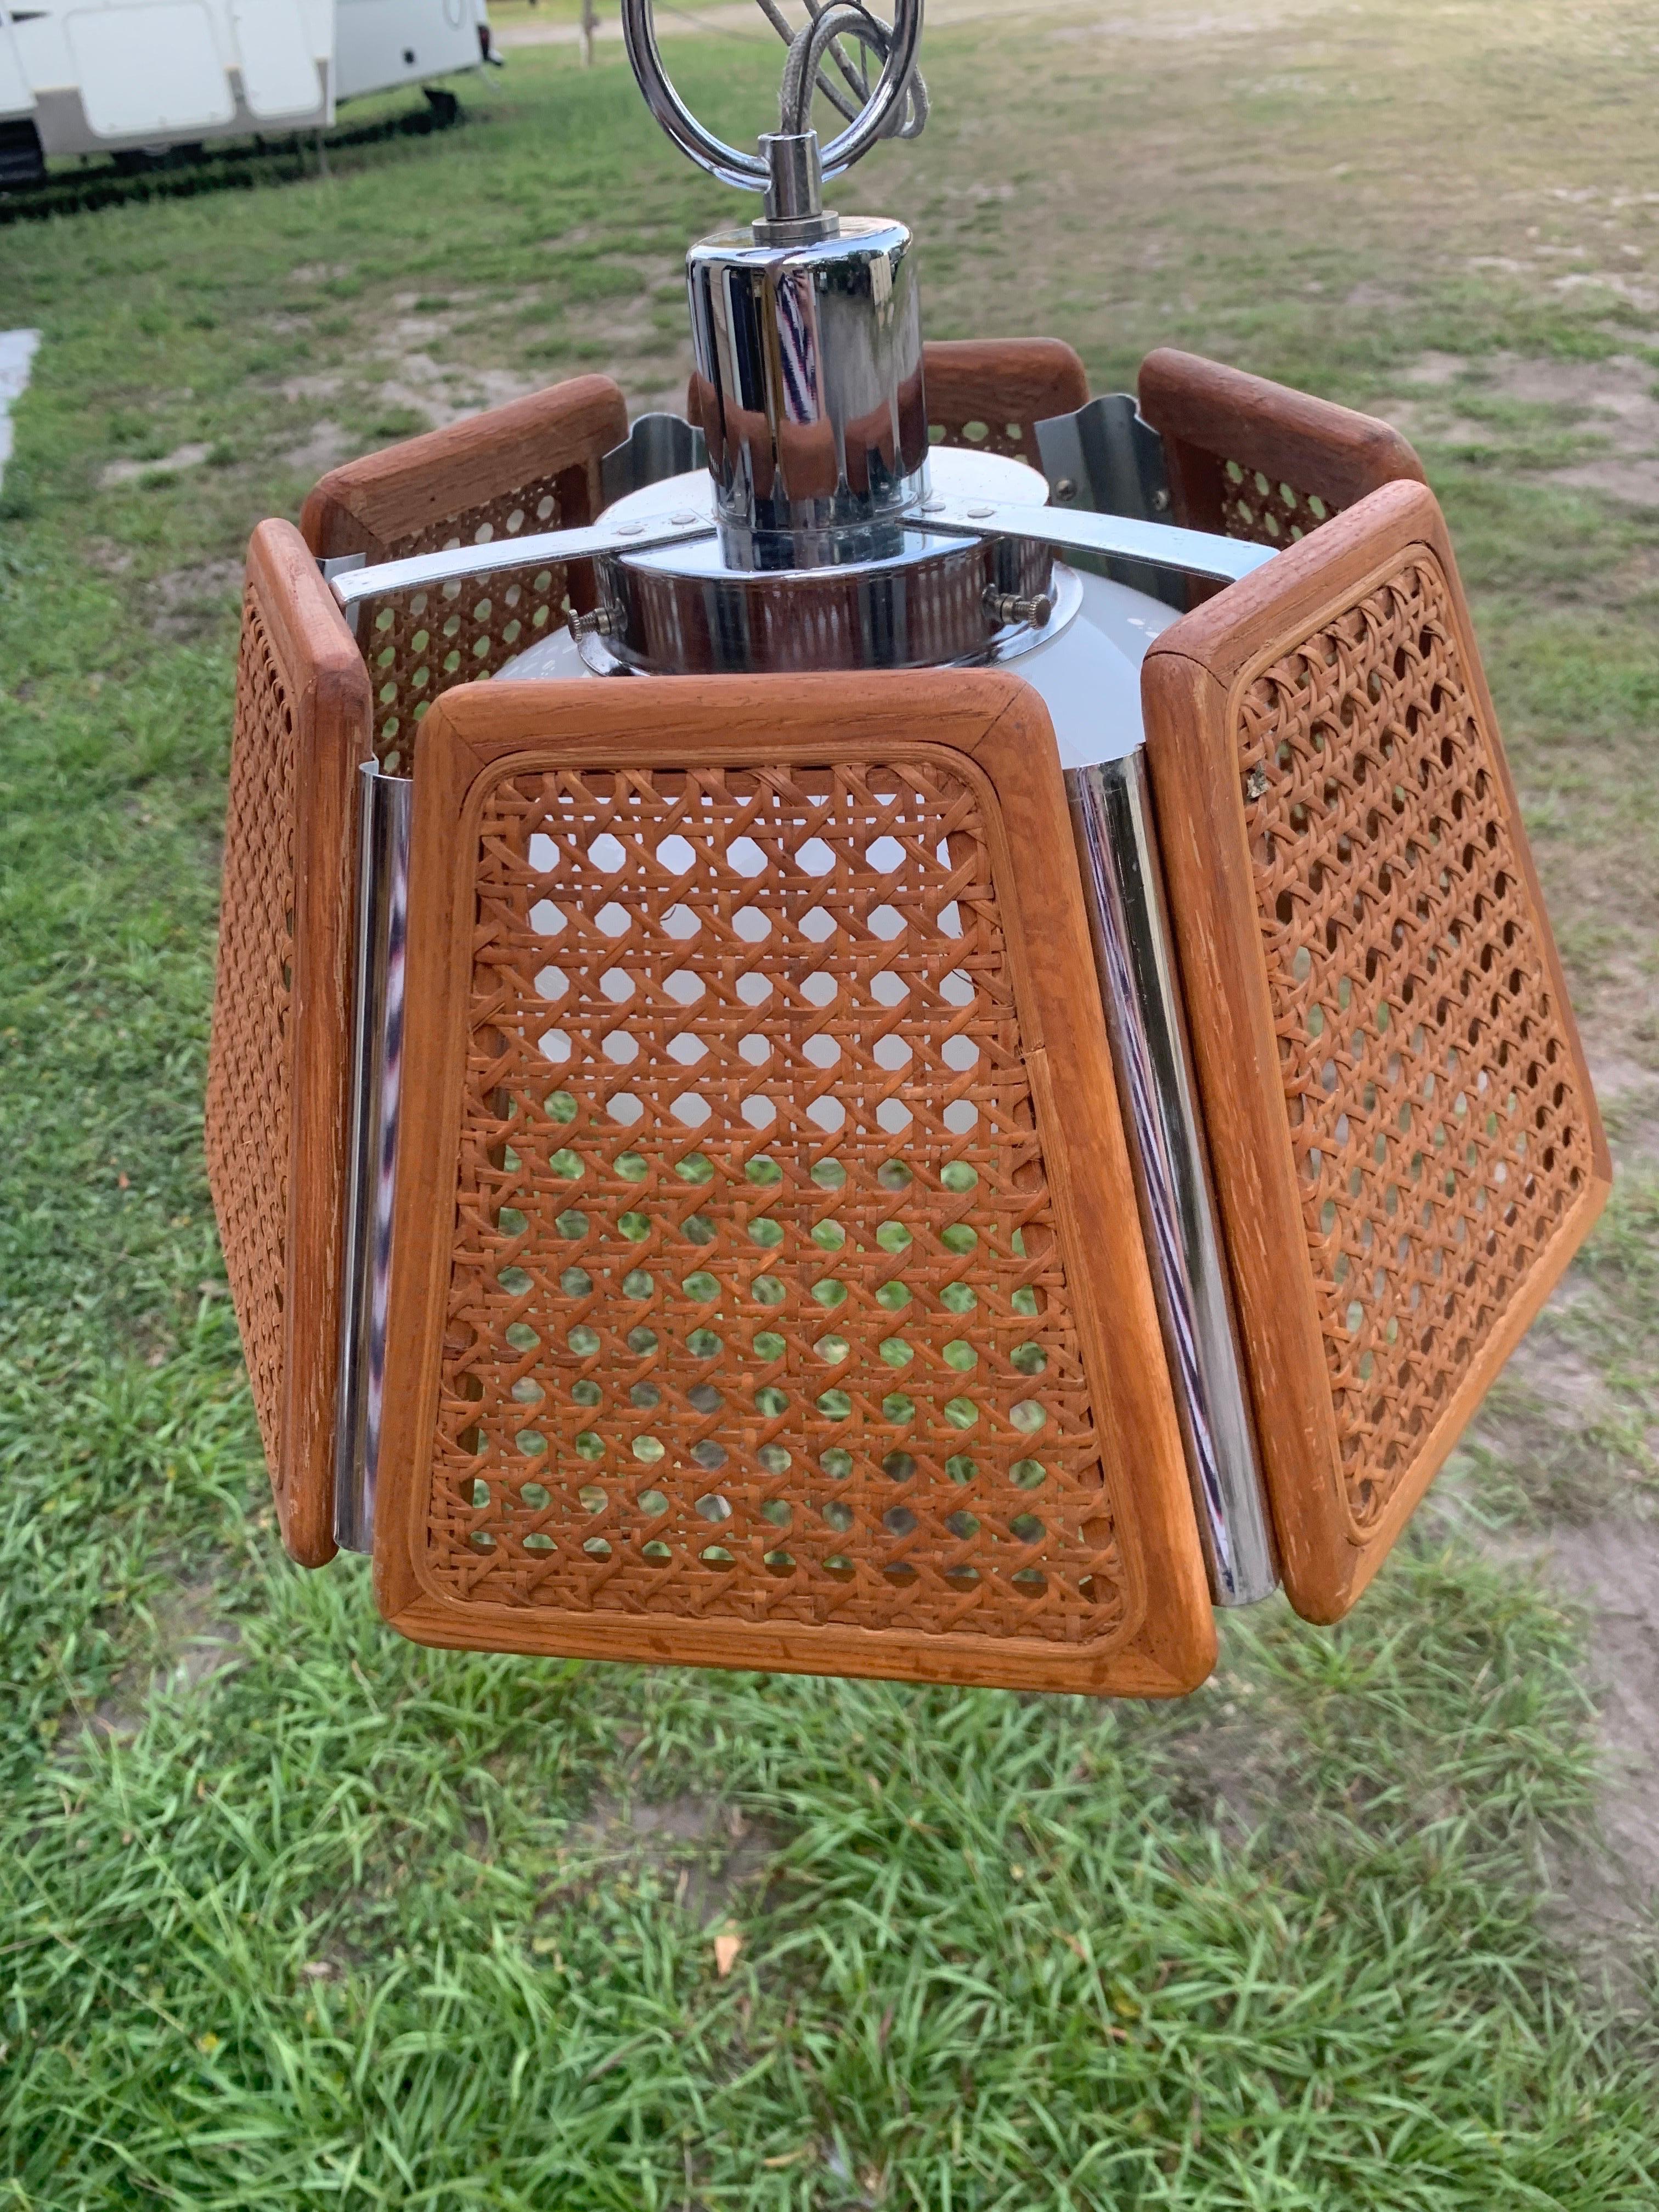 1970s cane and wicker light fixture with chrome accents. The chain on this piece is rather short, about 18 inches in length. Could possibly use a rewiring, however it was in working condition when removed. No major damages to note. 